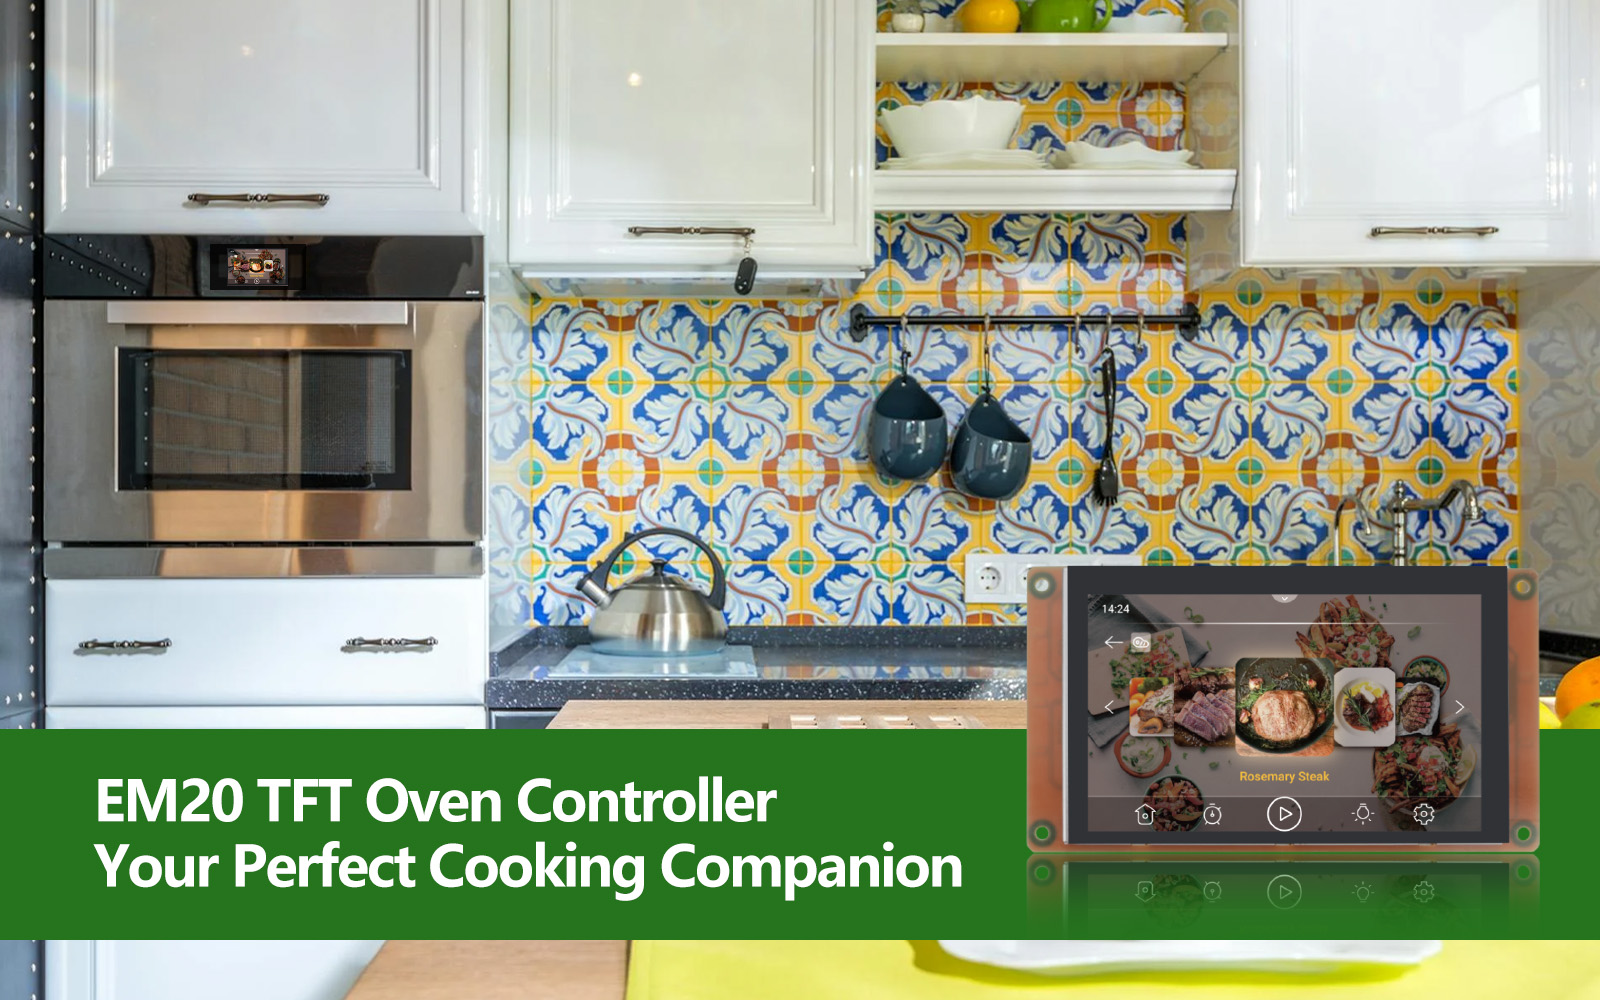 EM20 TFT Oven Controller: Your Perfect Cooking Companion